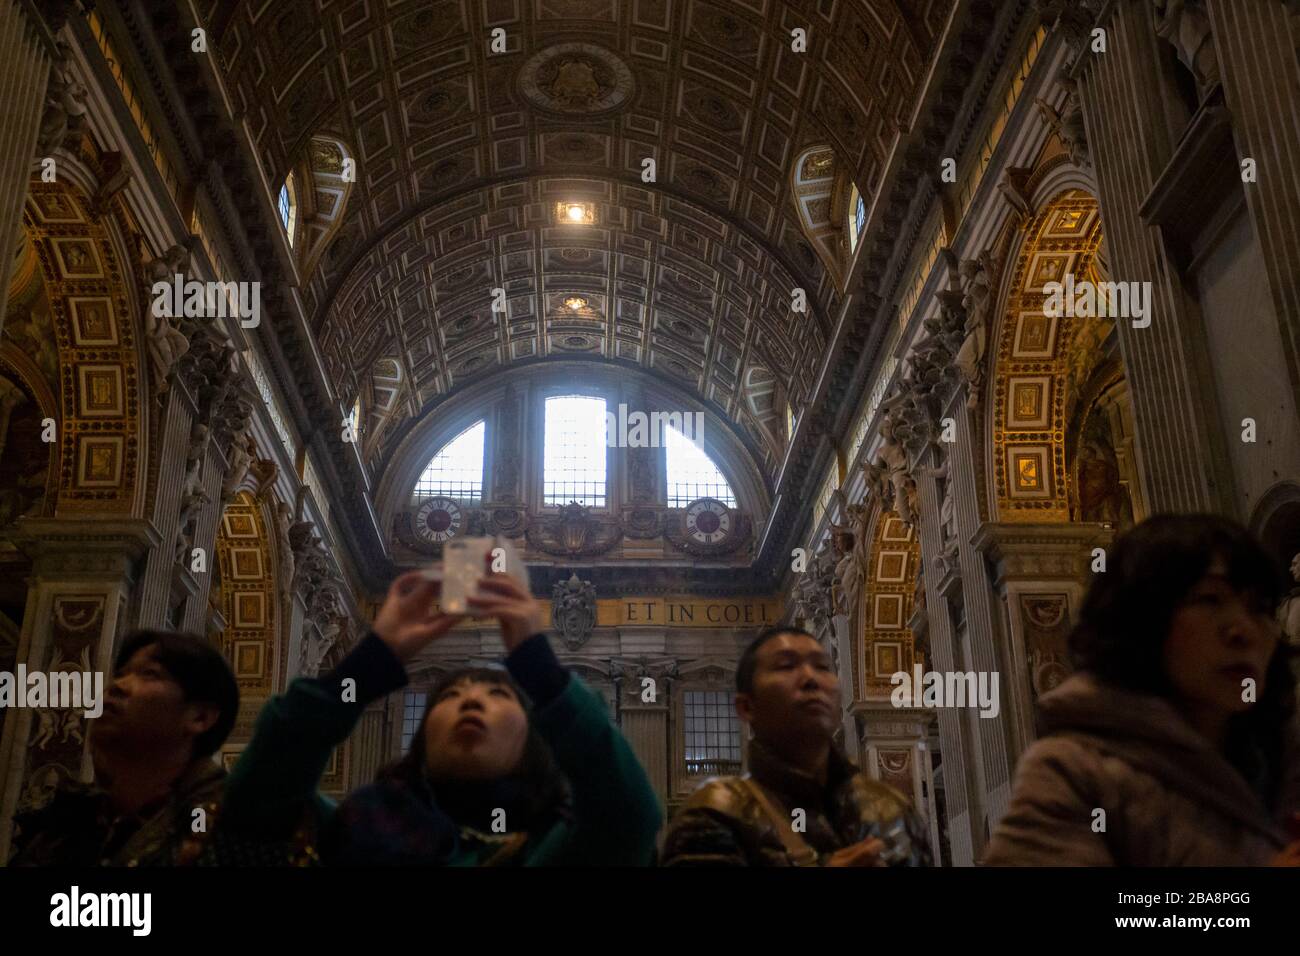 Tourists photographing inside the St Peter's Basilica in the Vatican Stock Photo